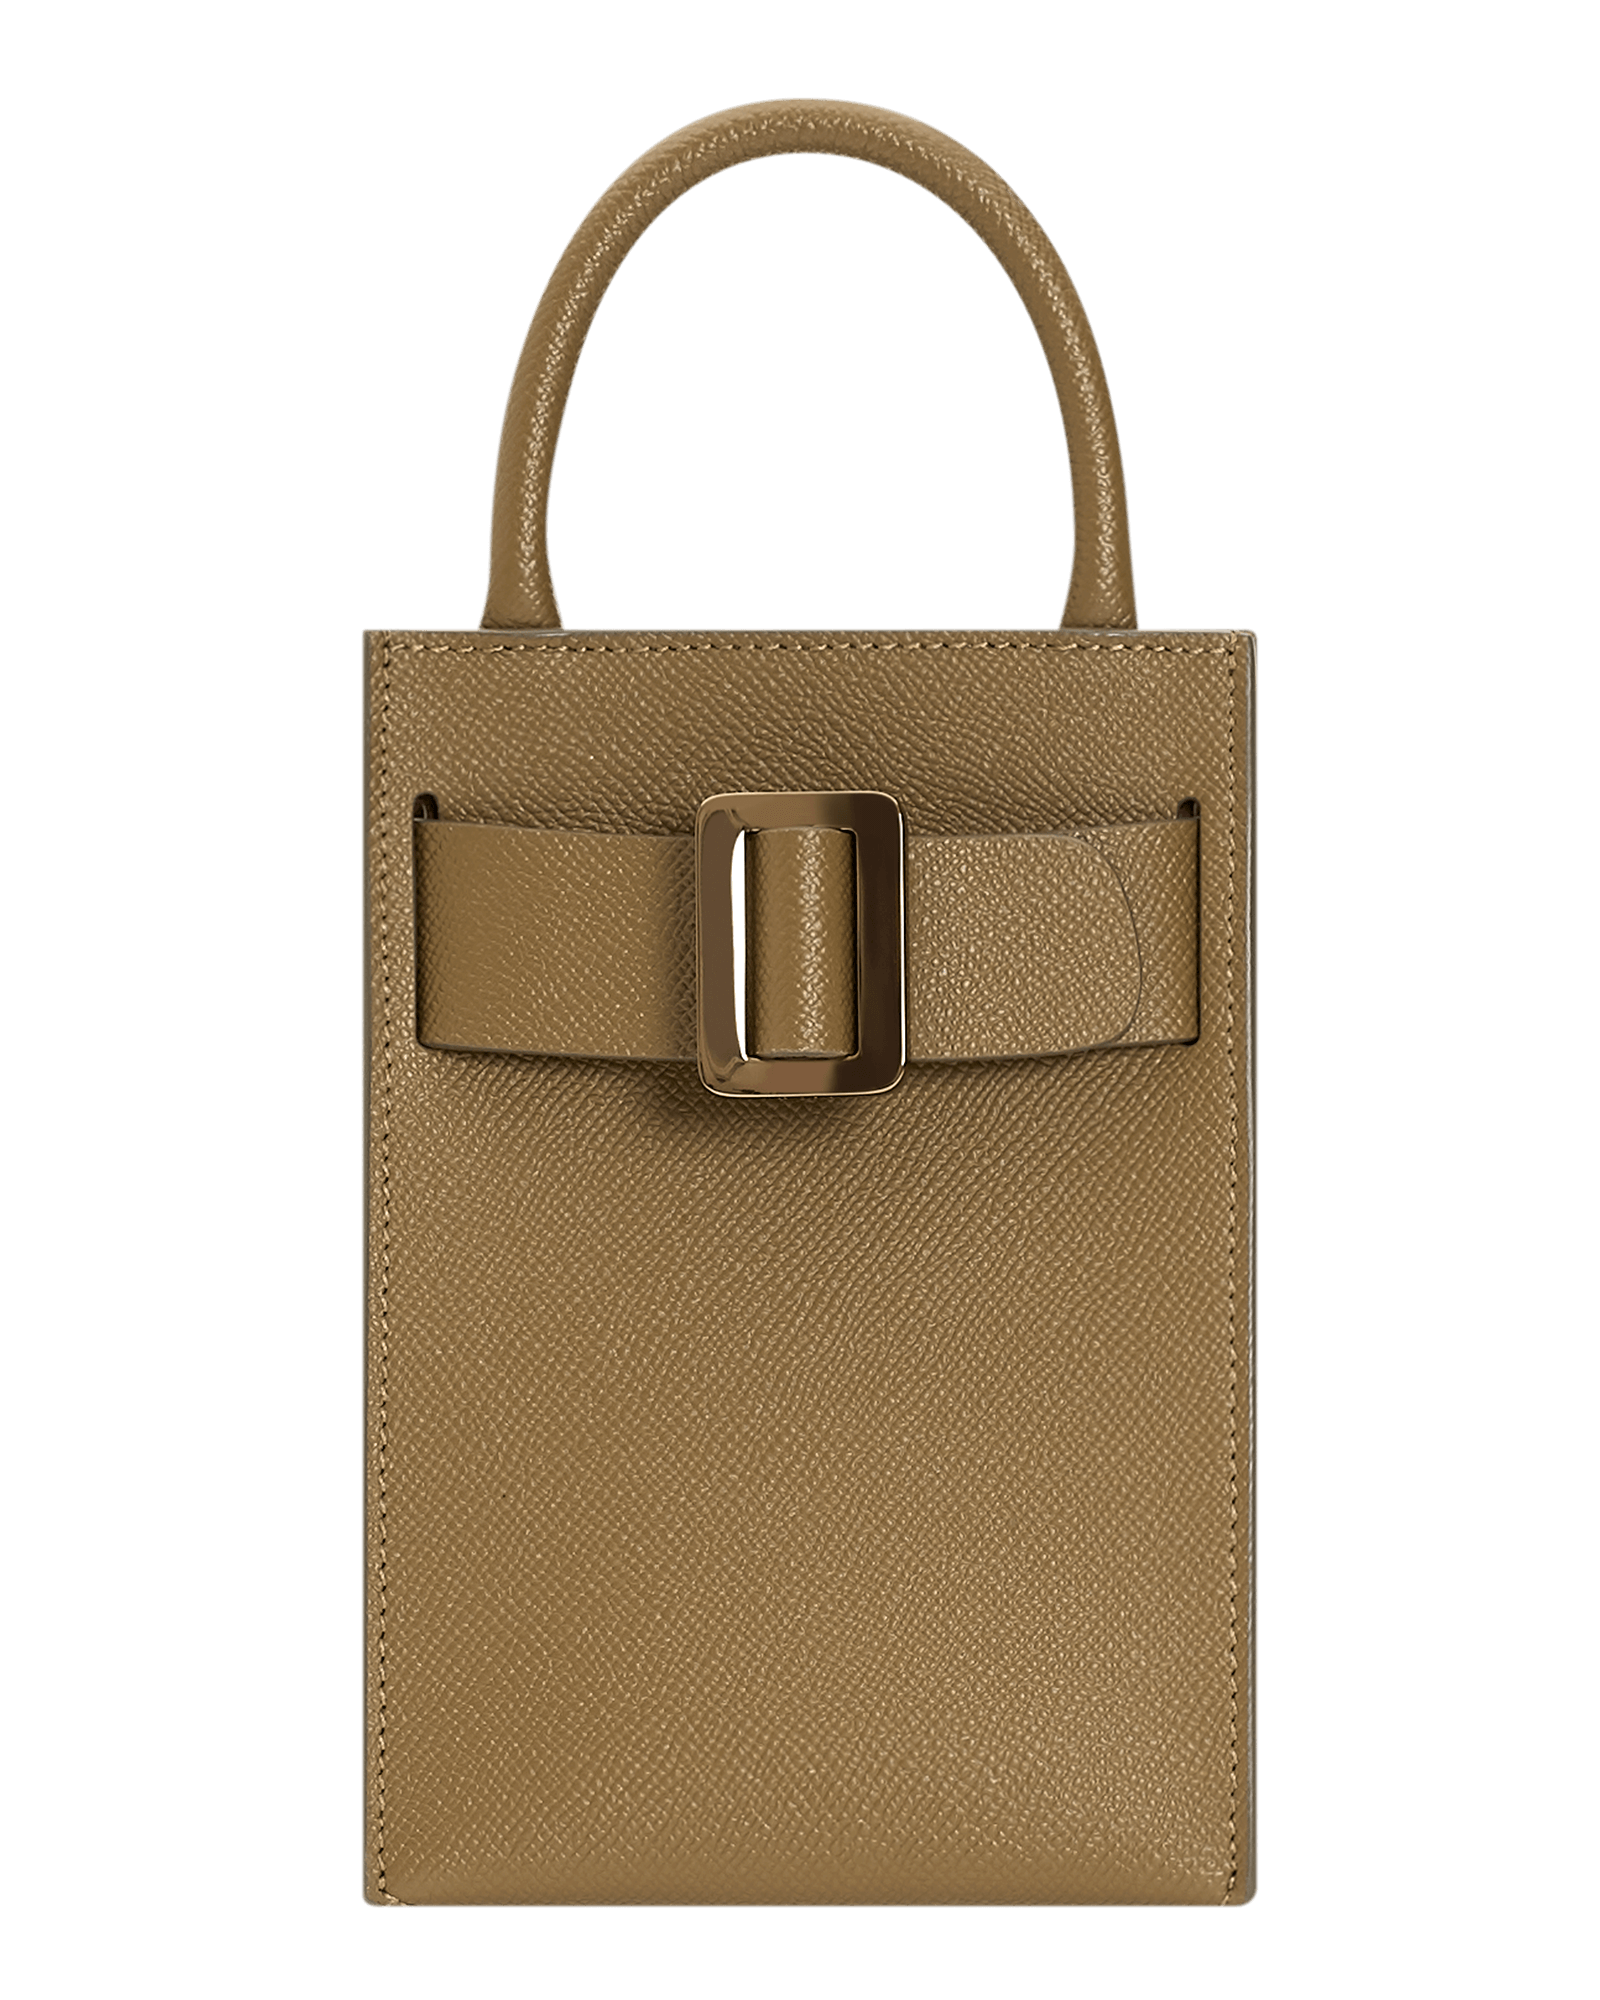 Elongated, small structured brown handbag with a gold buckle on the front, carry strap, and twin handles. Made with grained calfskin leather.